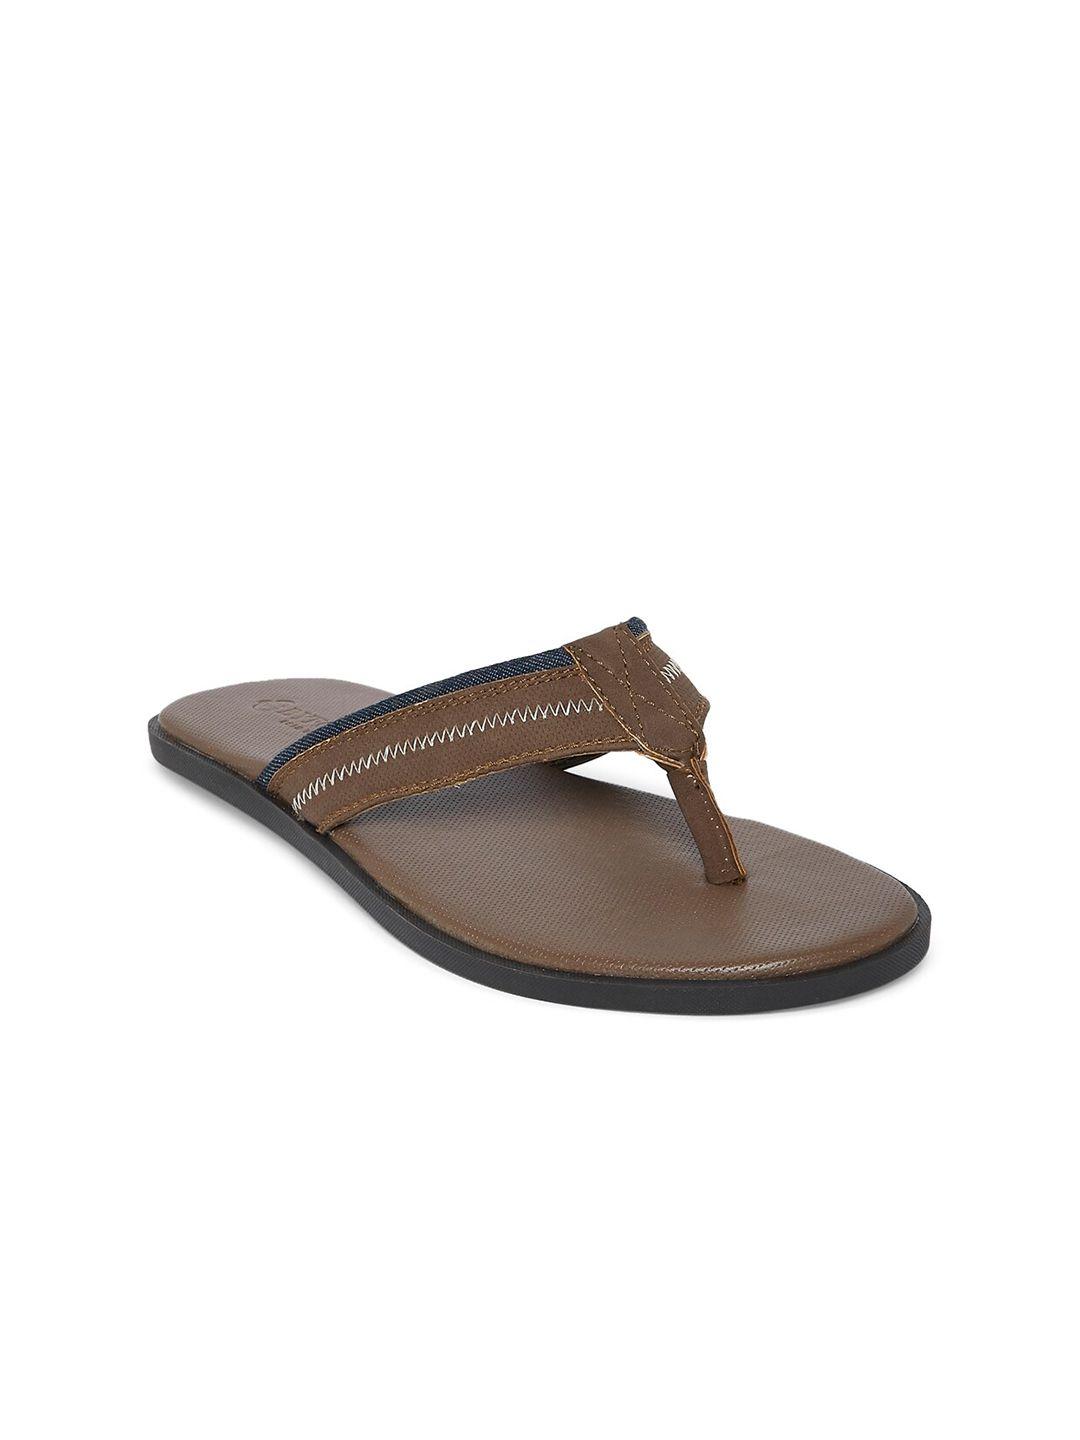 byford by pantaloons men brown solid comfort sandals